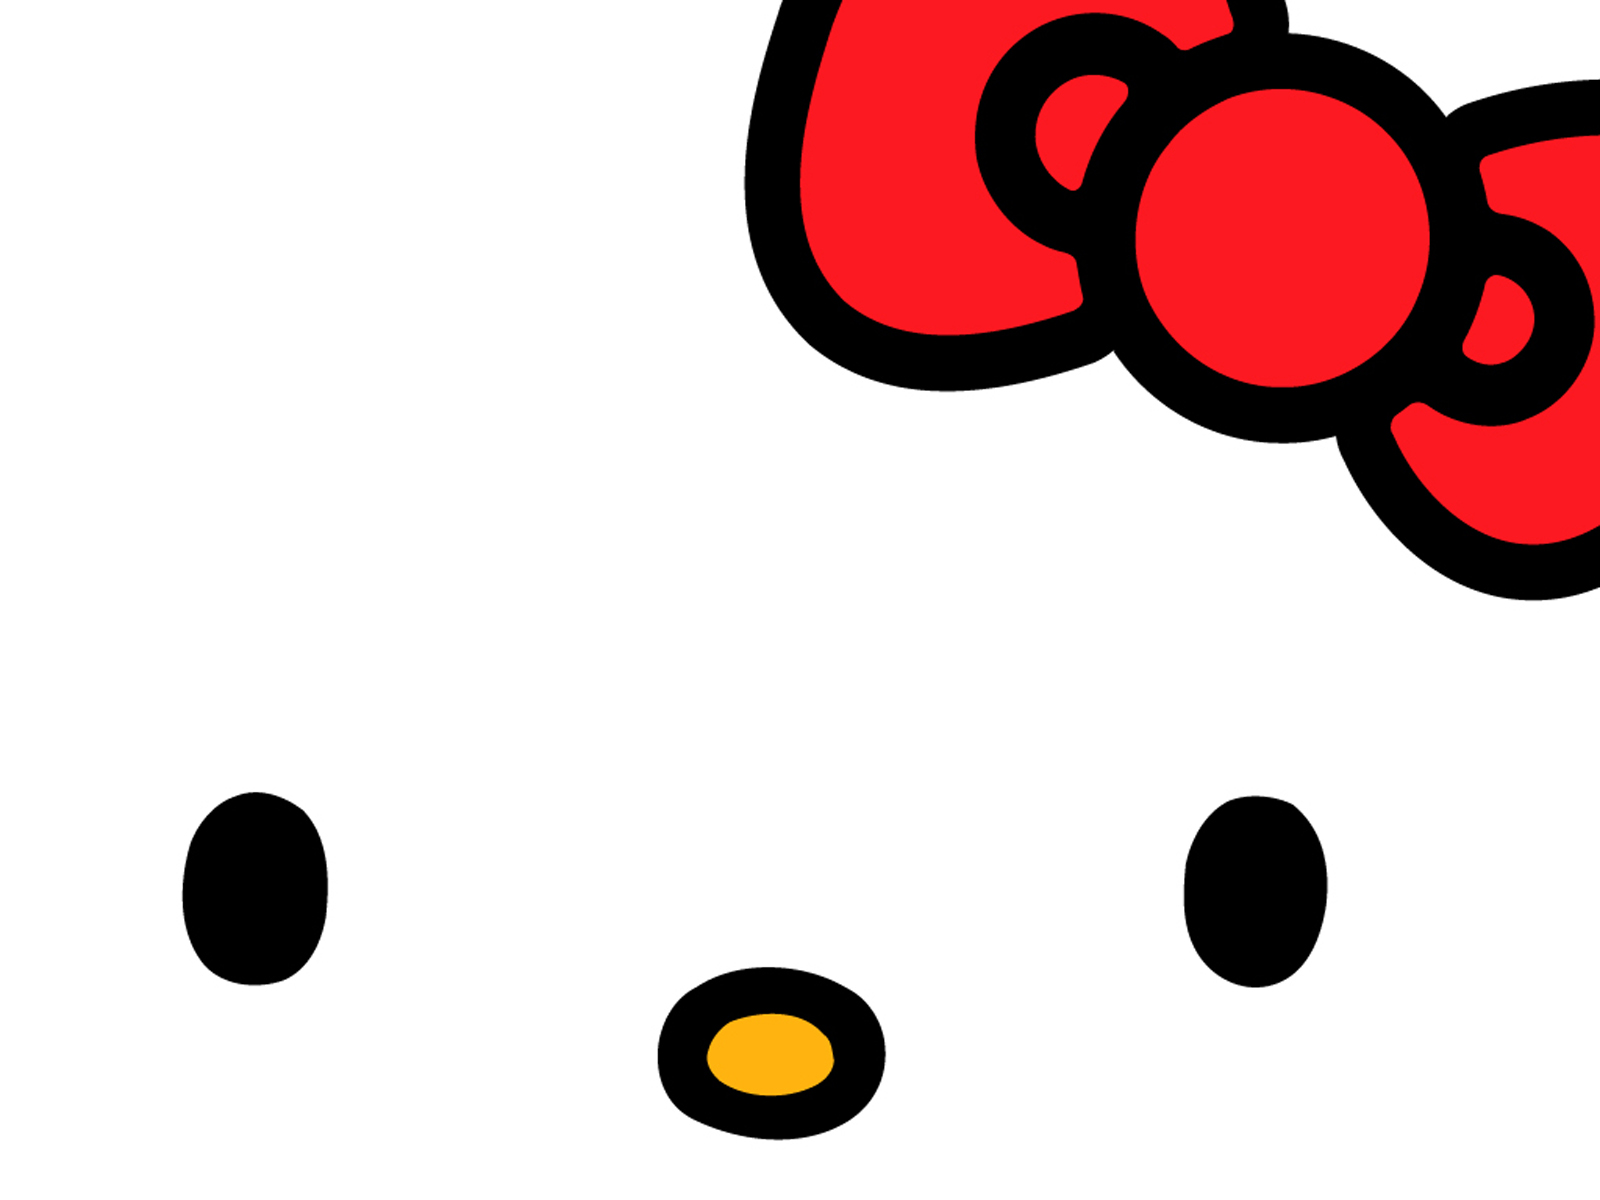 Free Download Hello Kitty Wallpaper White Wallpaper High Images, Photos, Reviews